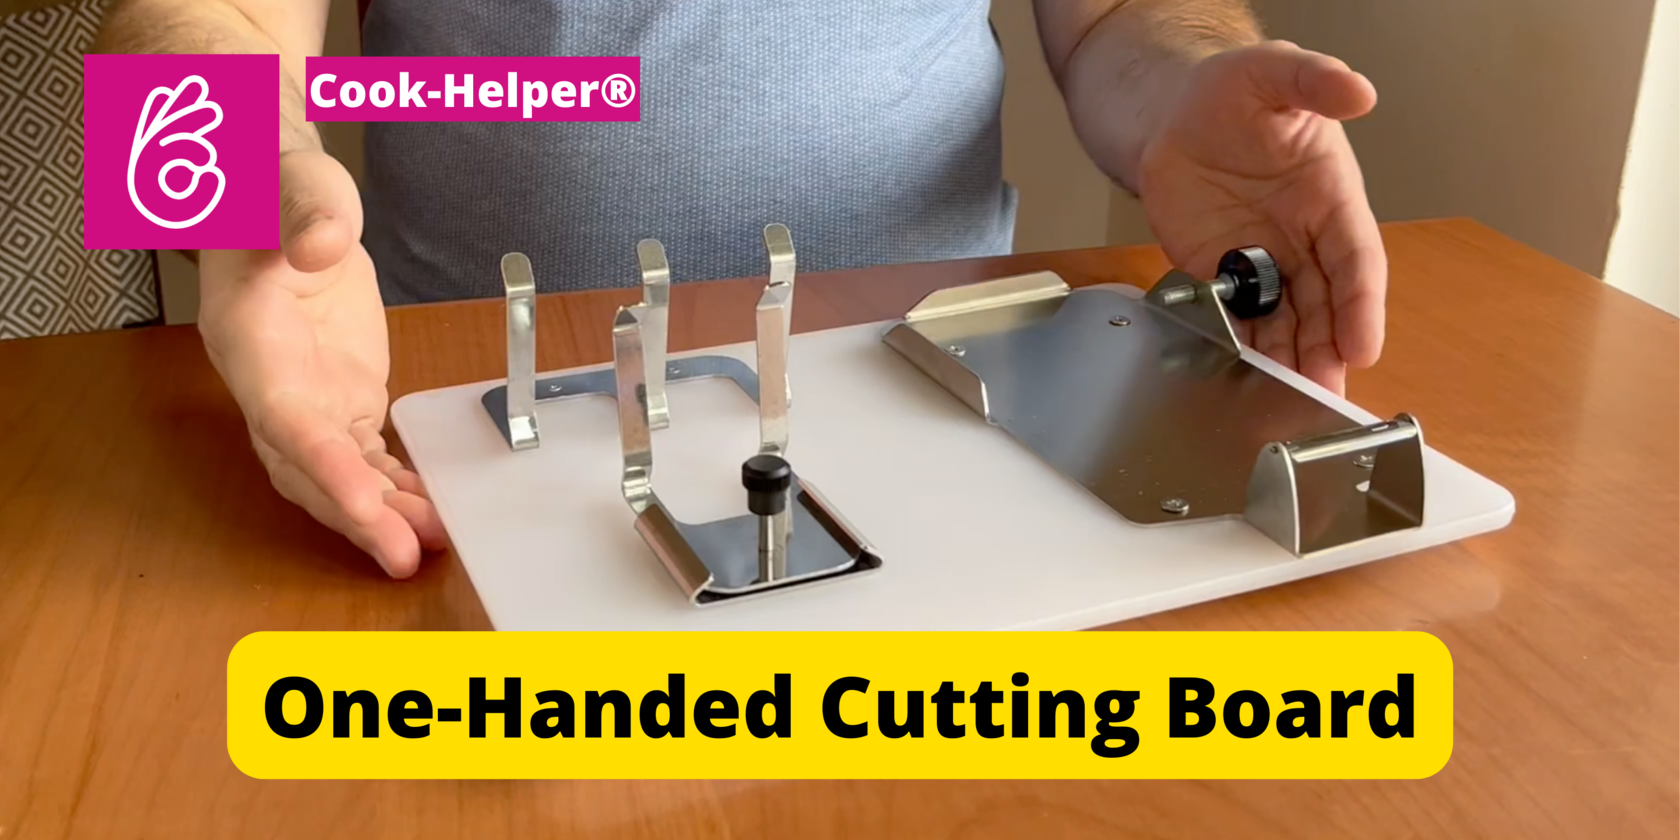 One Handed Cutting Board 'Cook-Helper' | Adaptive cooking tools for  disabilities | Adaptive Kitchen Equipment | Gadgets for Handicapped | For  Stroke